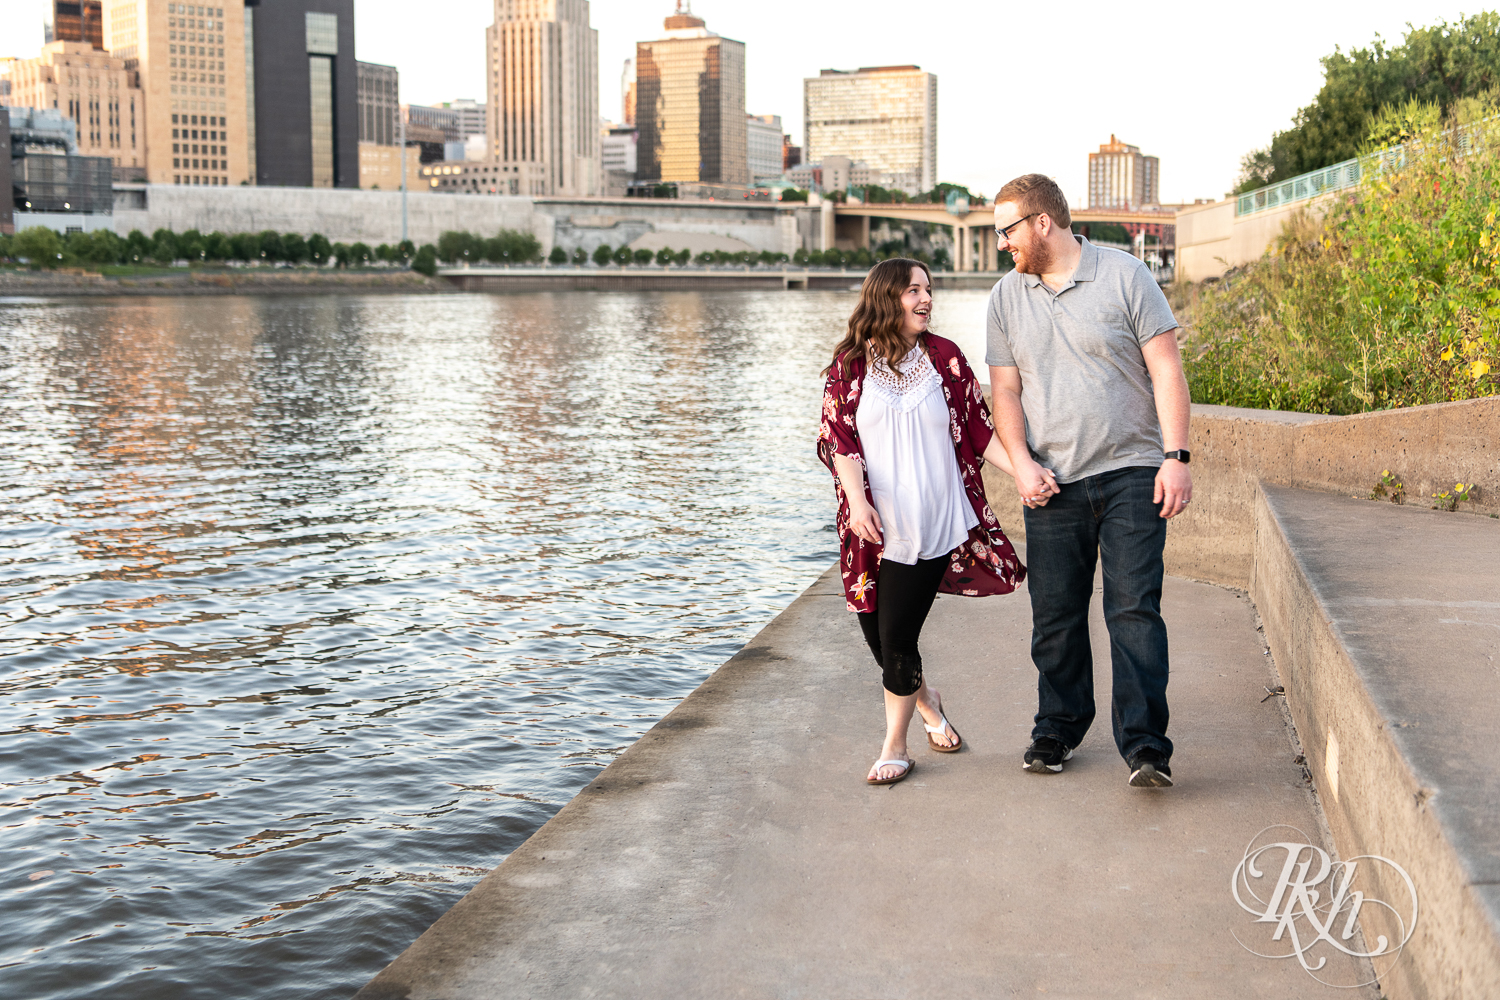 Man and woman walk together with city in background during golden hour on Harriet Island in Saint Paul, Minnesota.